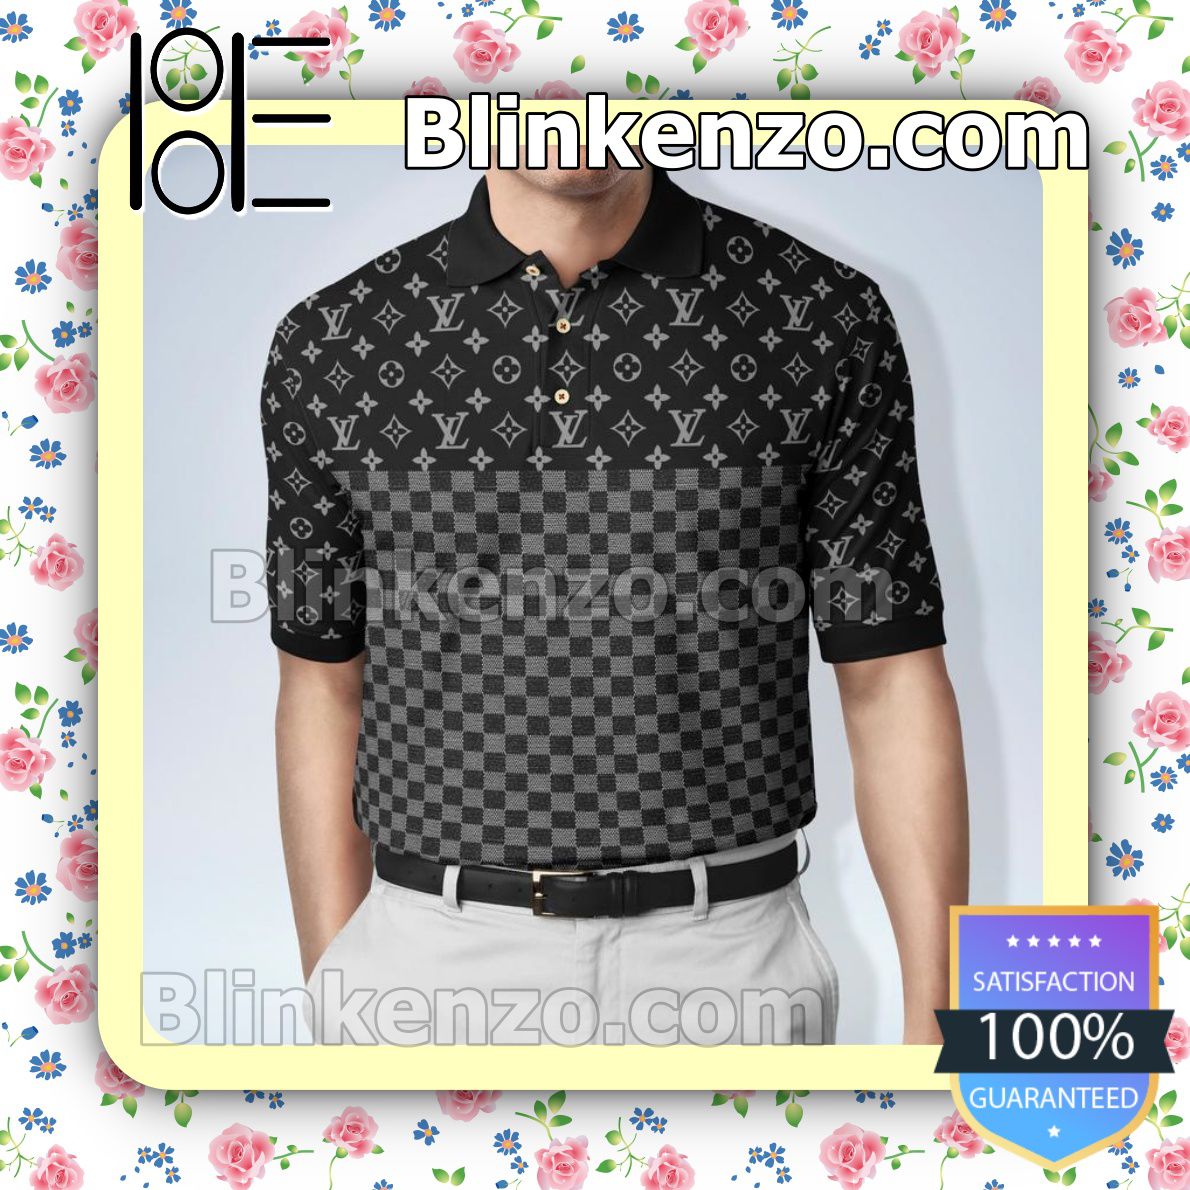 Louis Vuitton Monogram With Black And Grey Check Pattern Embroidered Polo Shirts